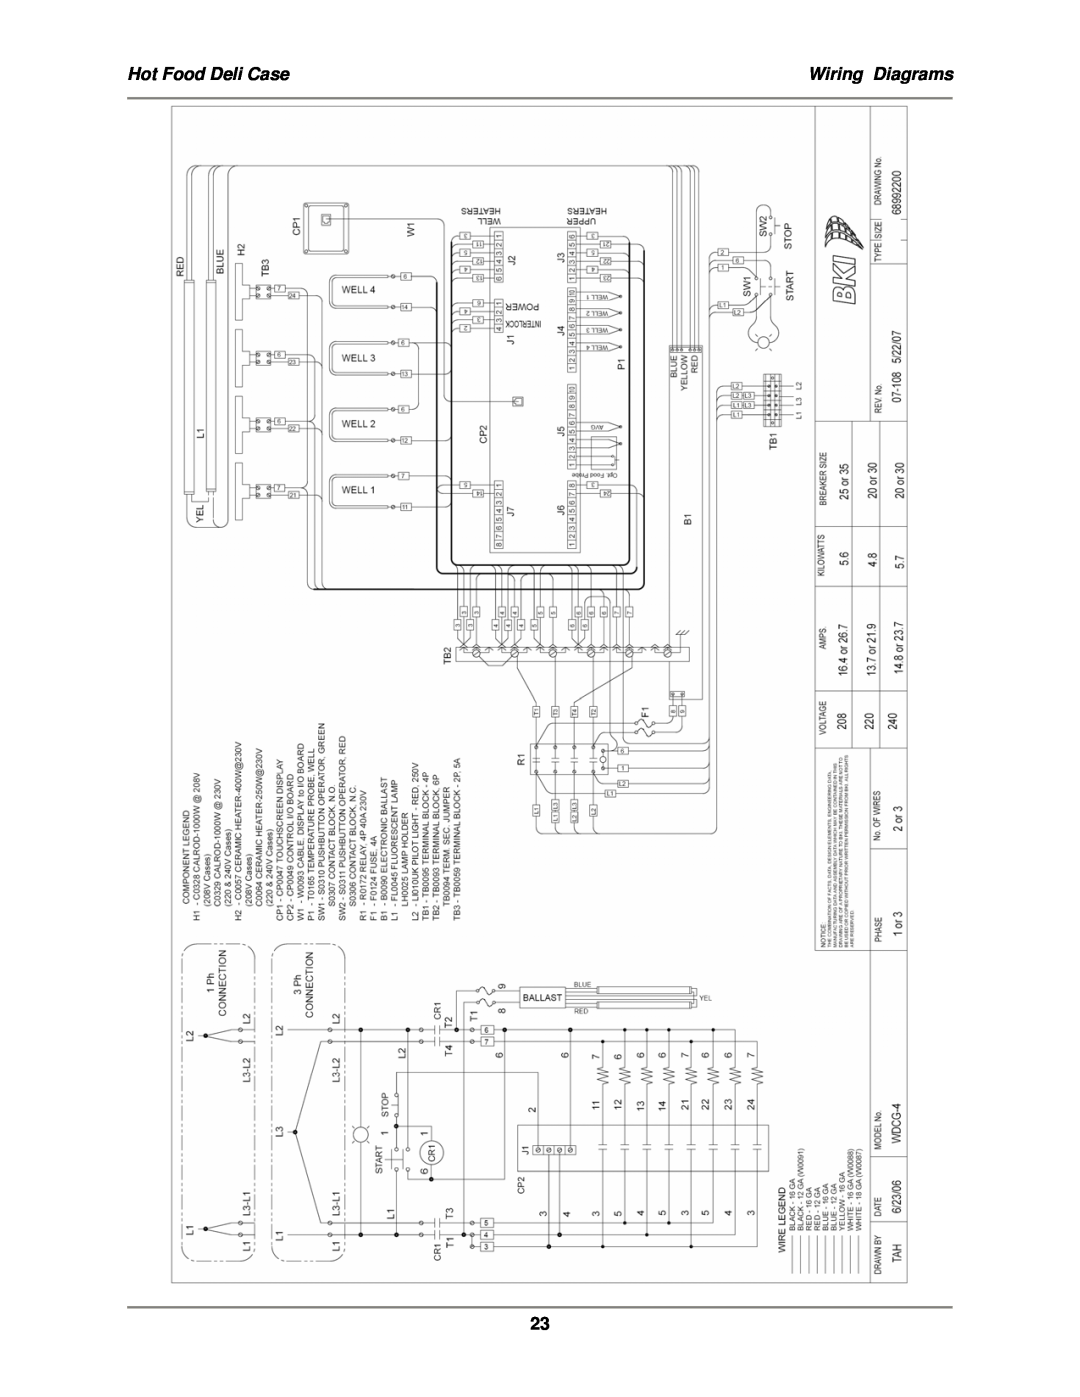 Bakers Pride Oven SSWG, WDCG, CSWG operation manual Hot Food Deli Case, Wiring Diagrams 